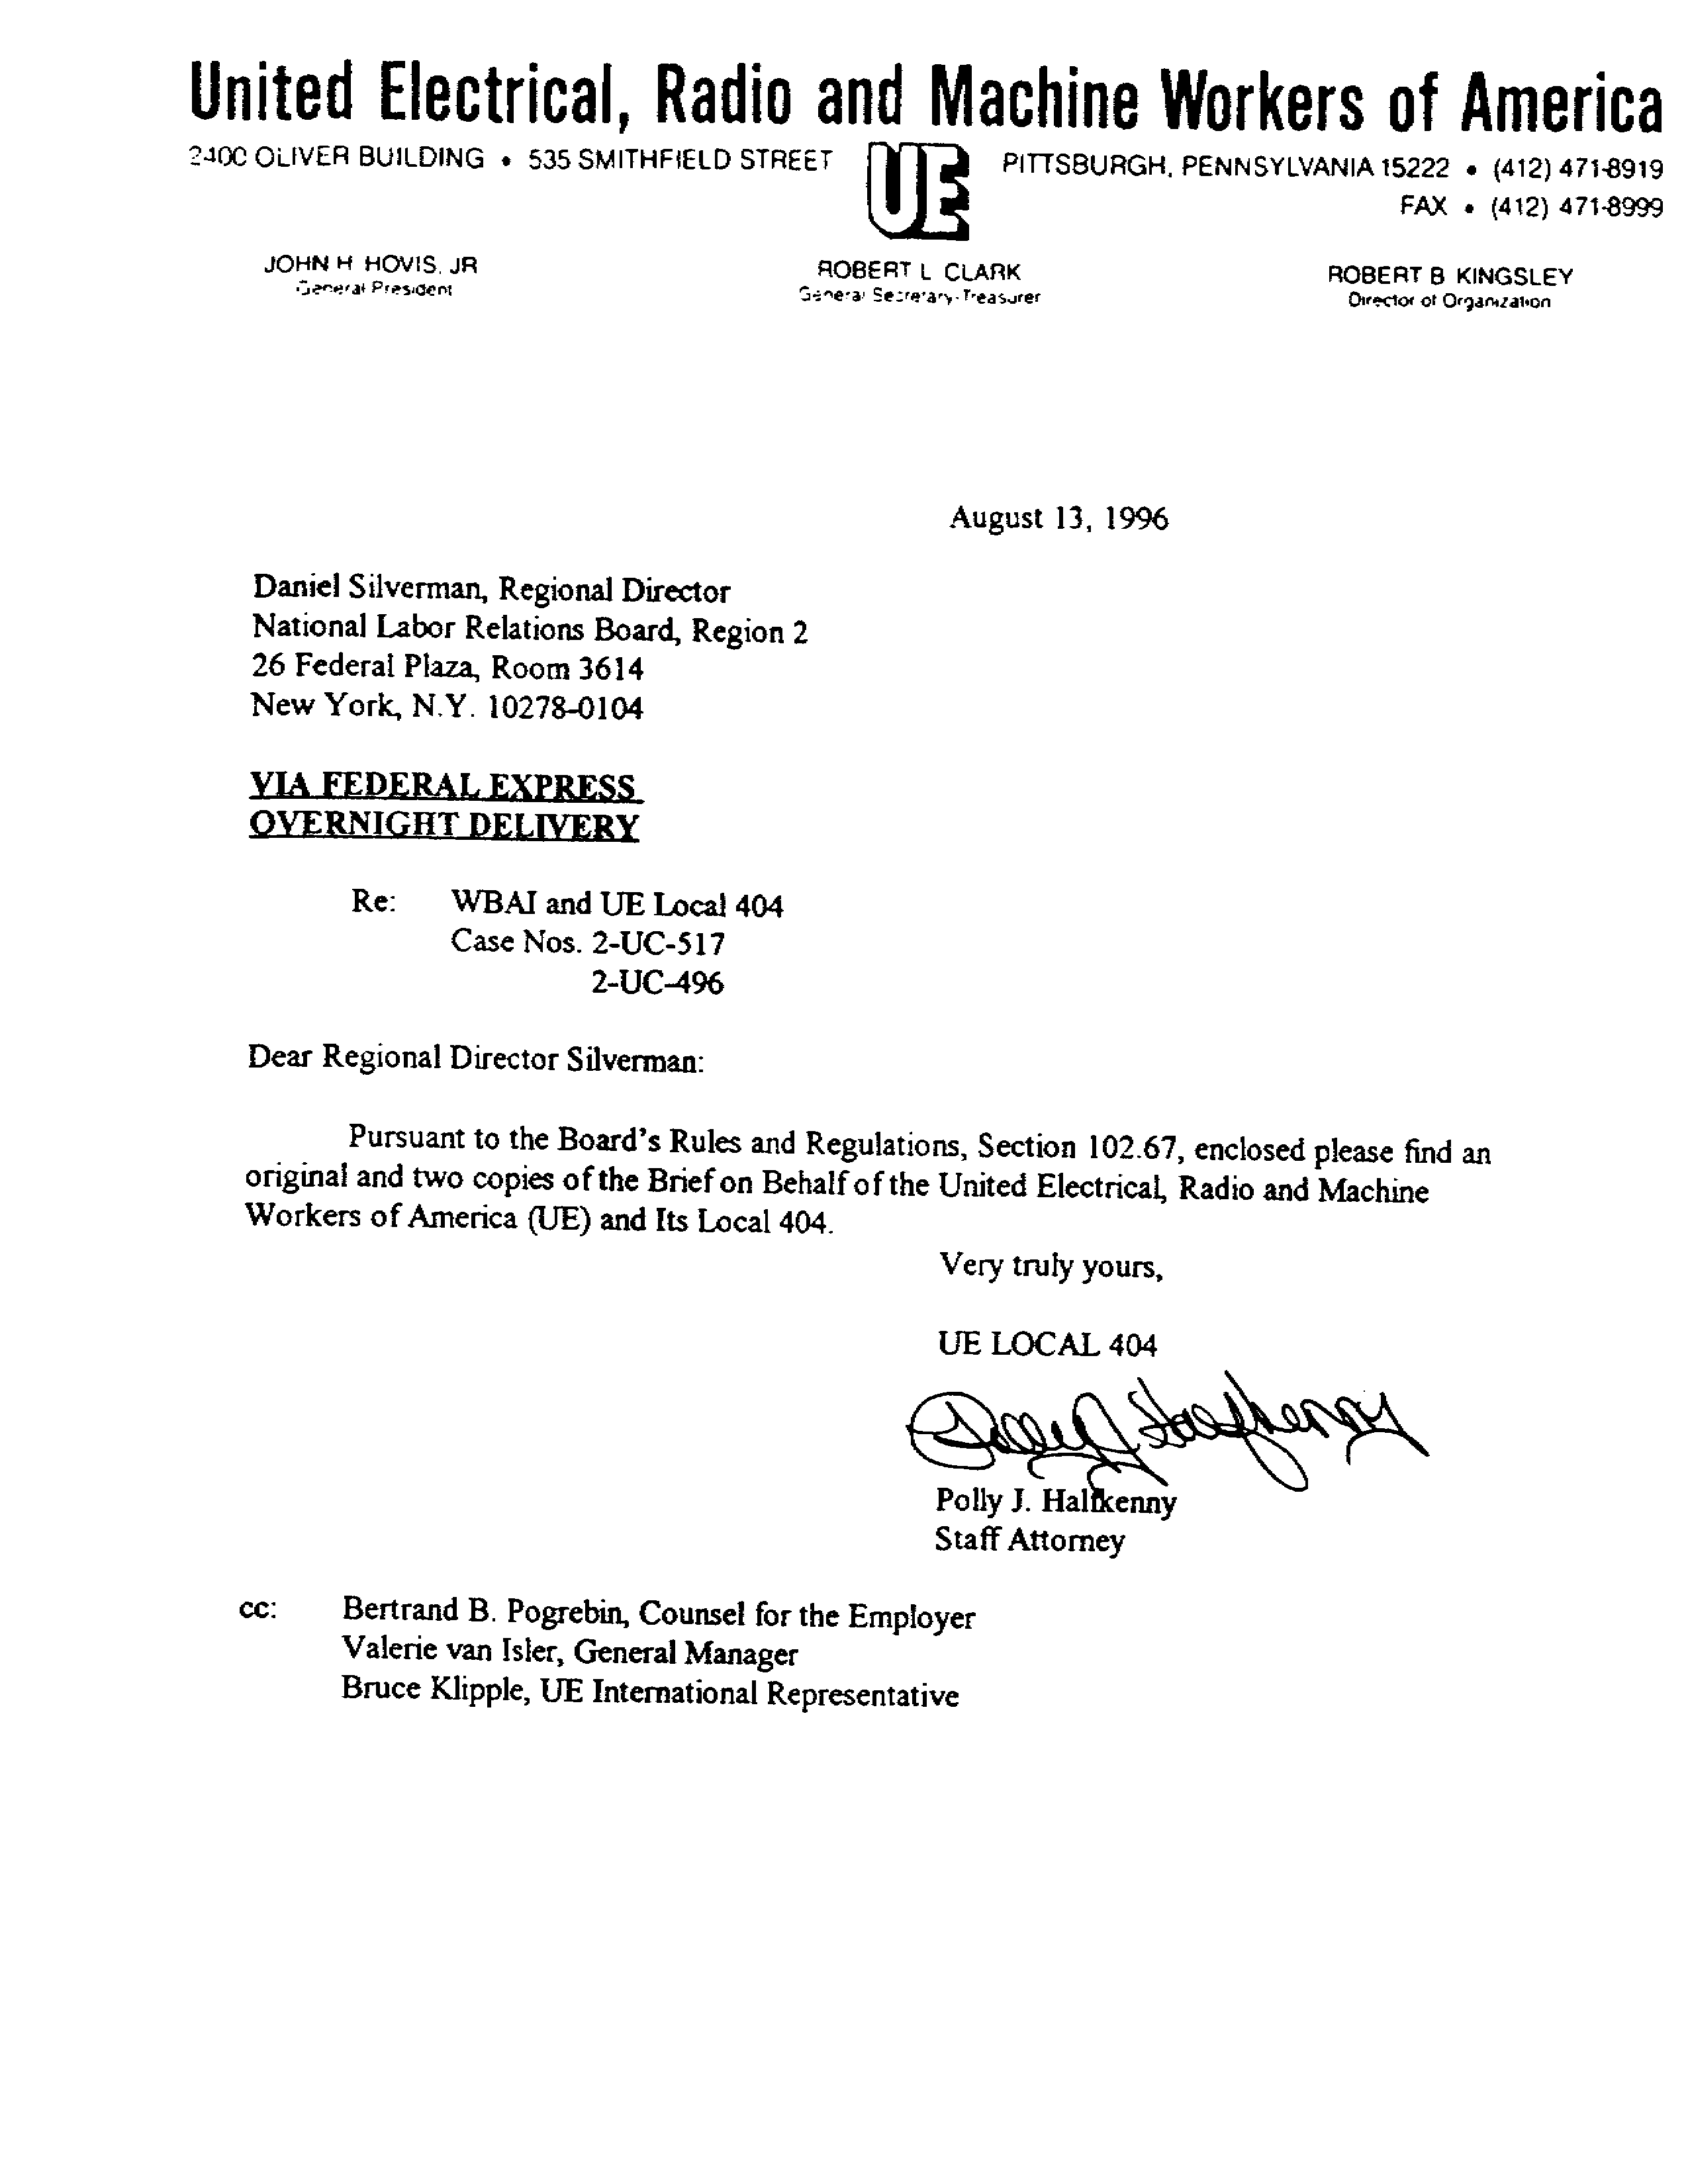 First page of the Union's brief to the NLRB